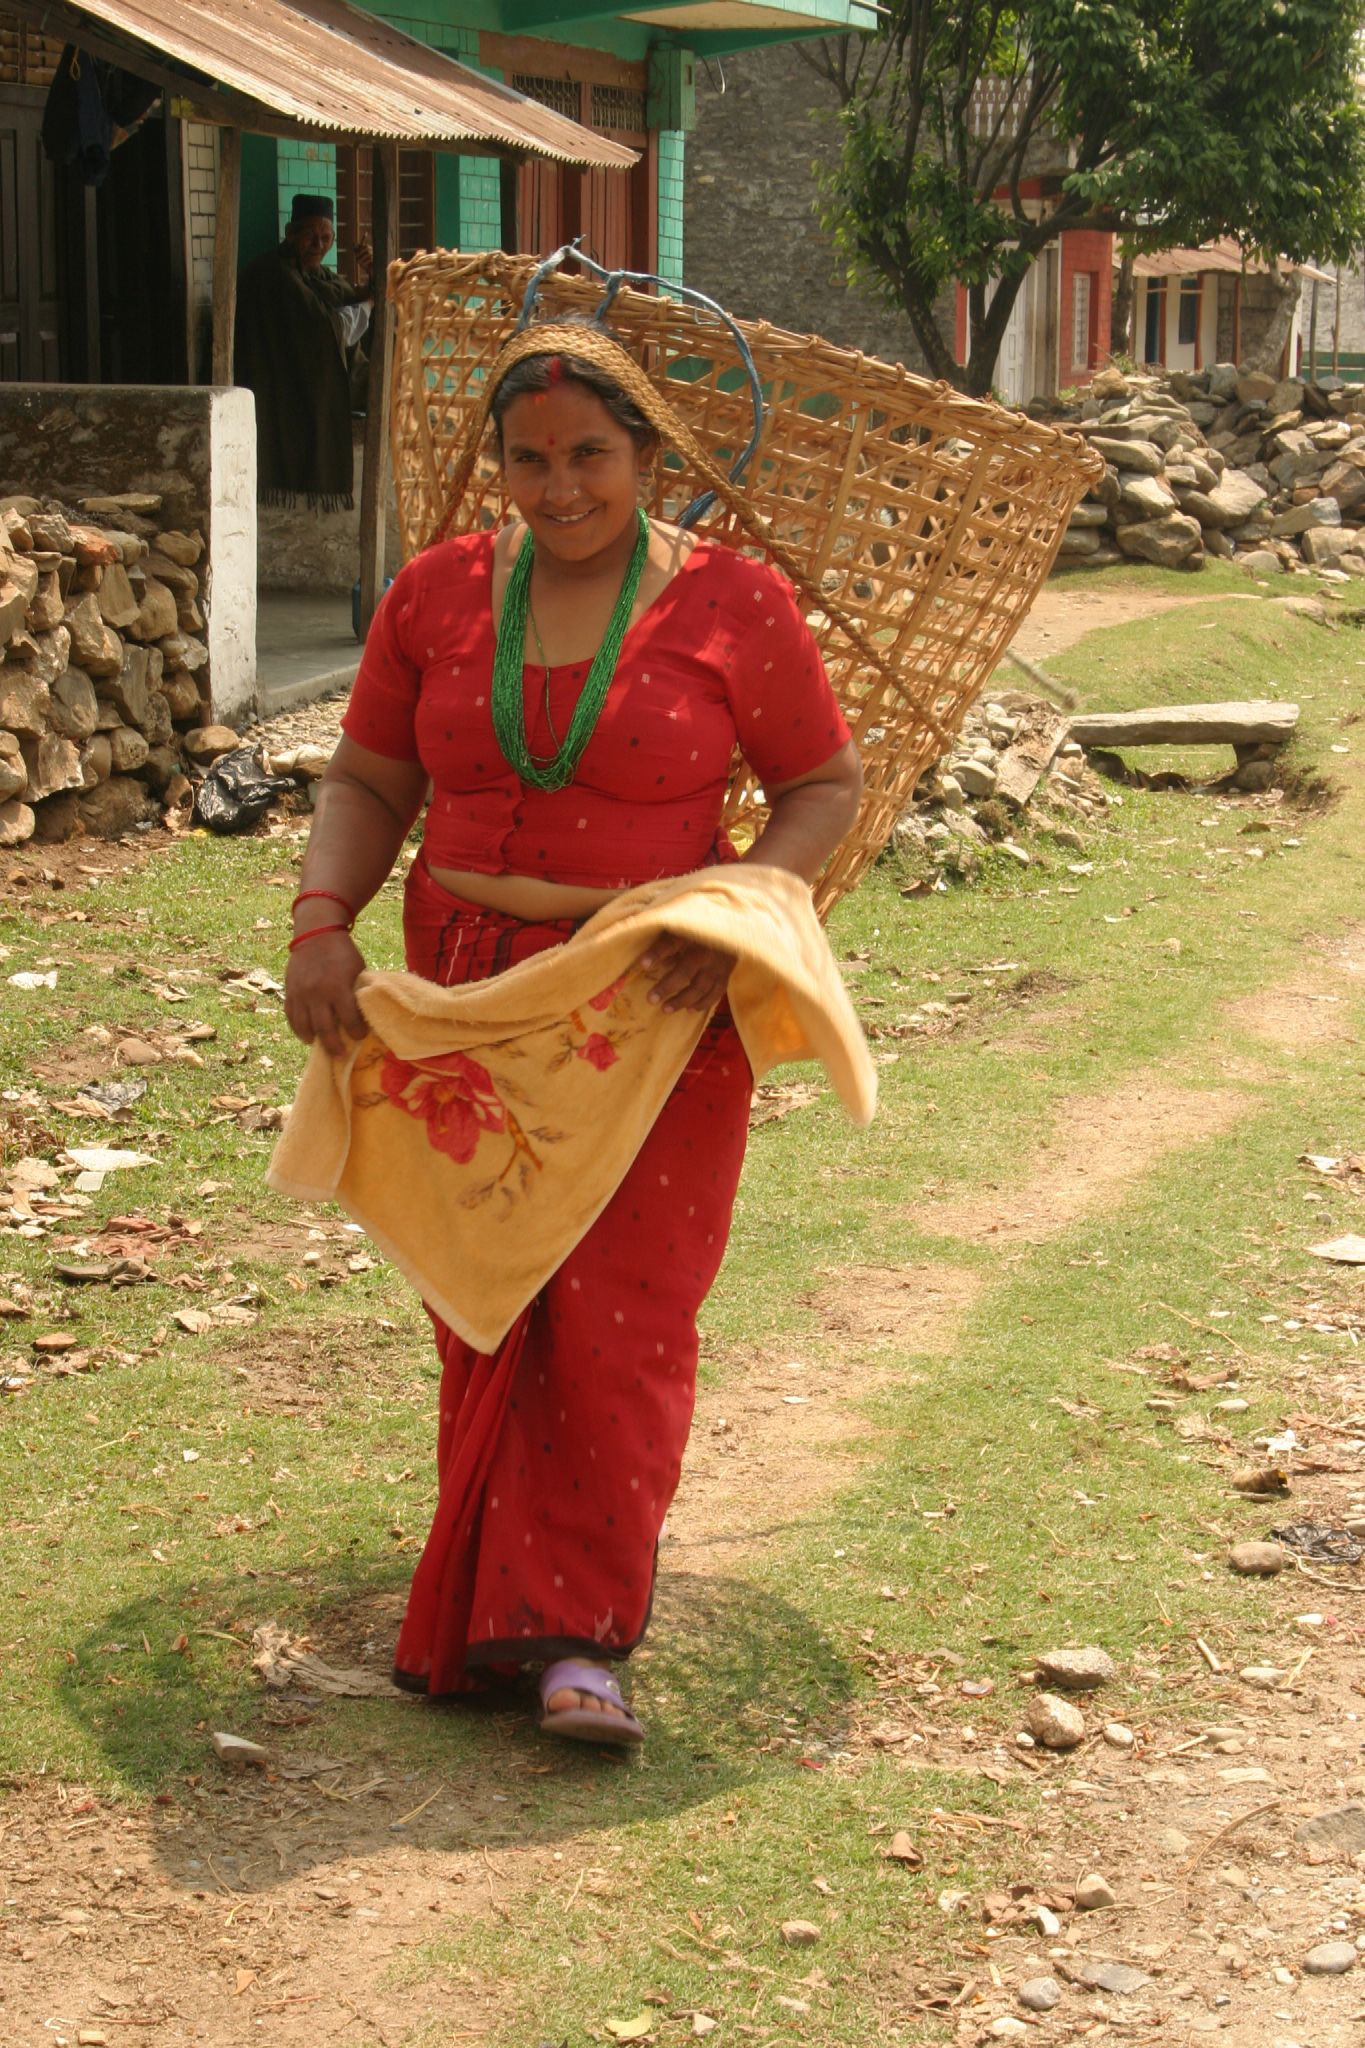 a woman carrying wickers walks on a dirt path